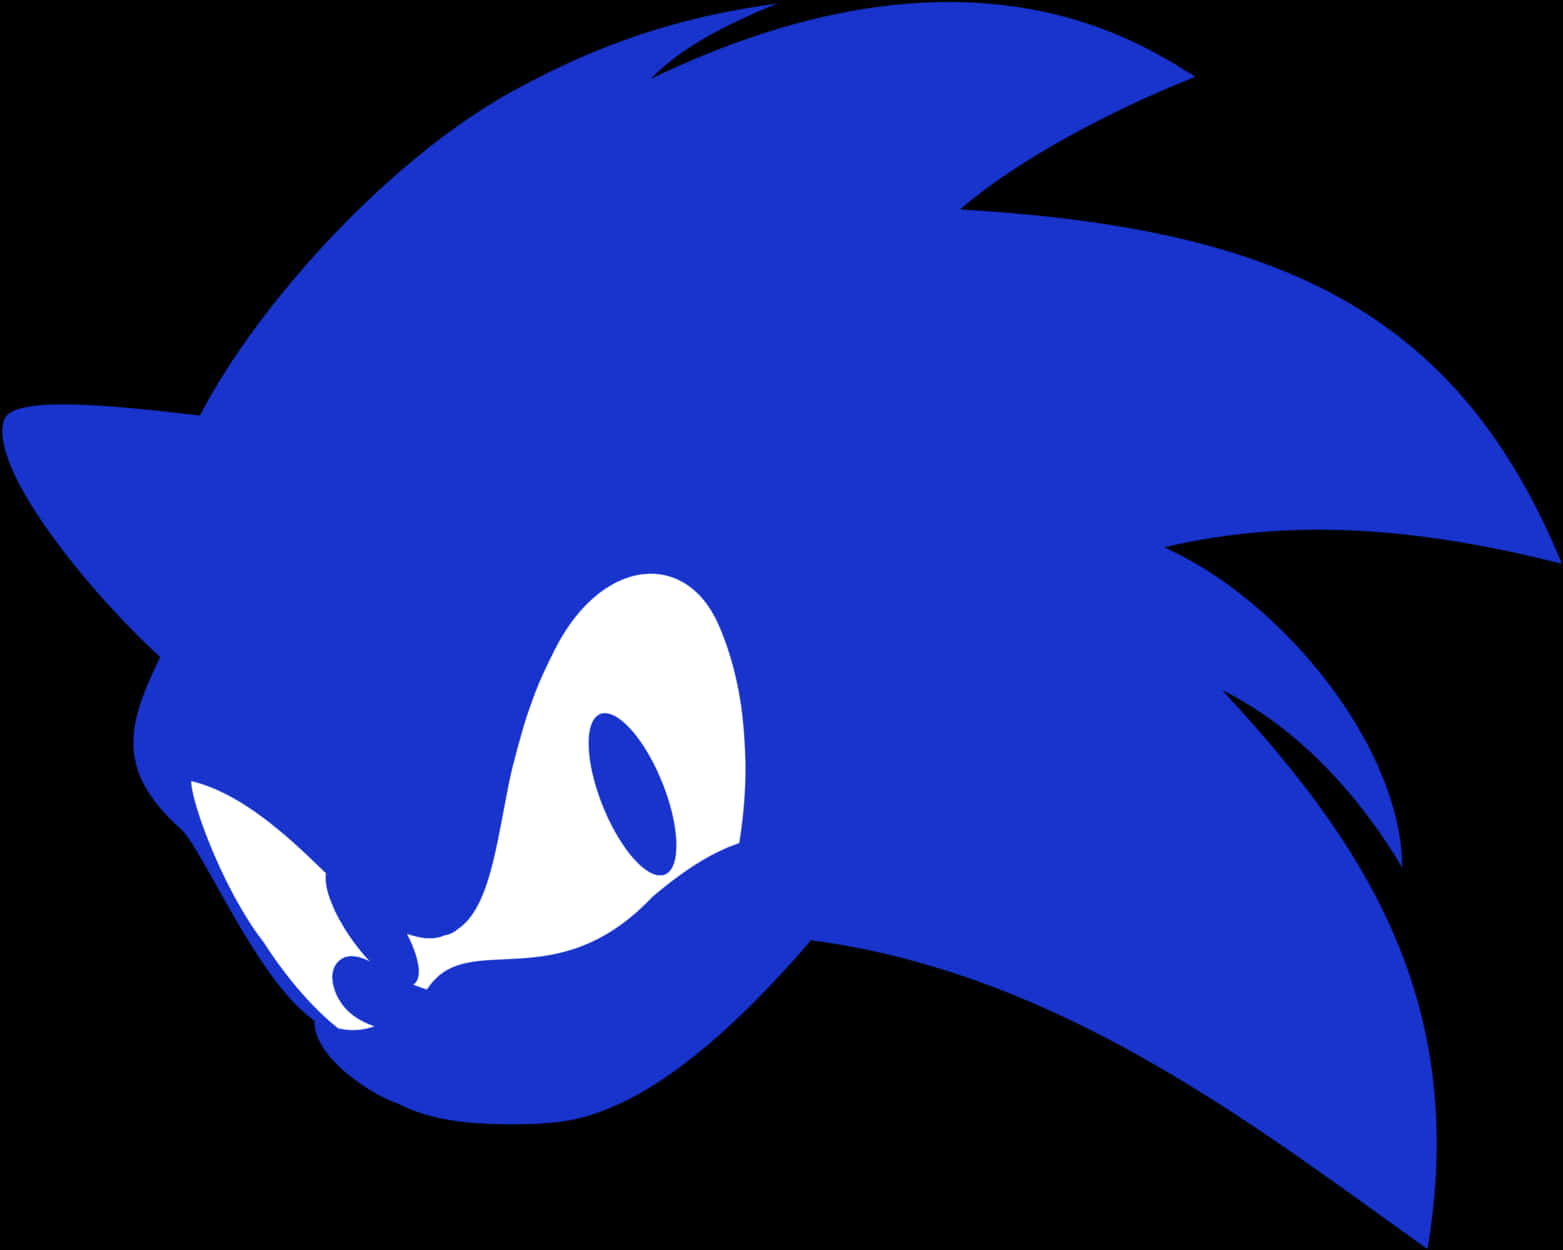 Blue Hedgehog Silhouette Graphic PNG image